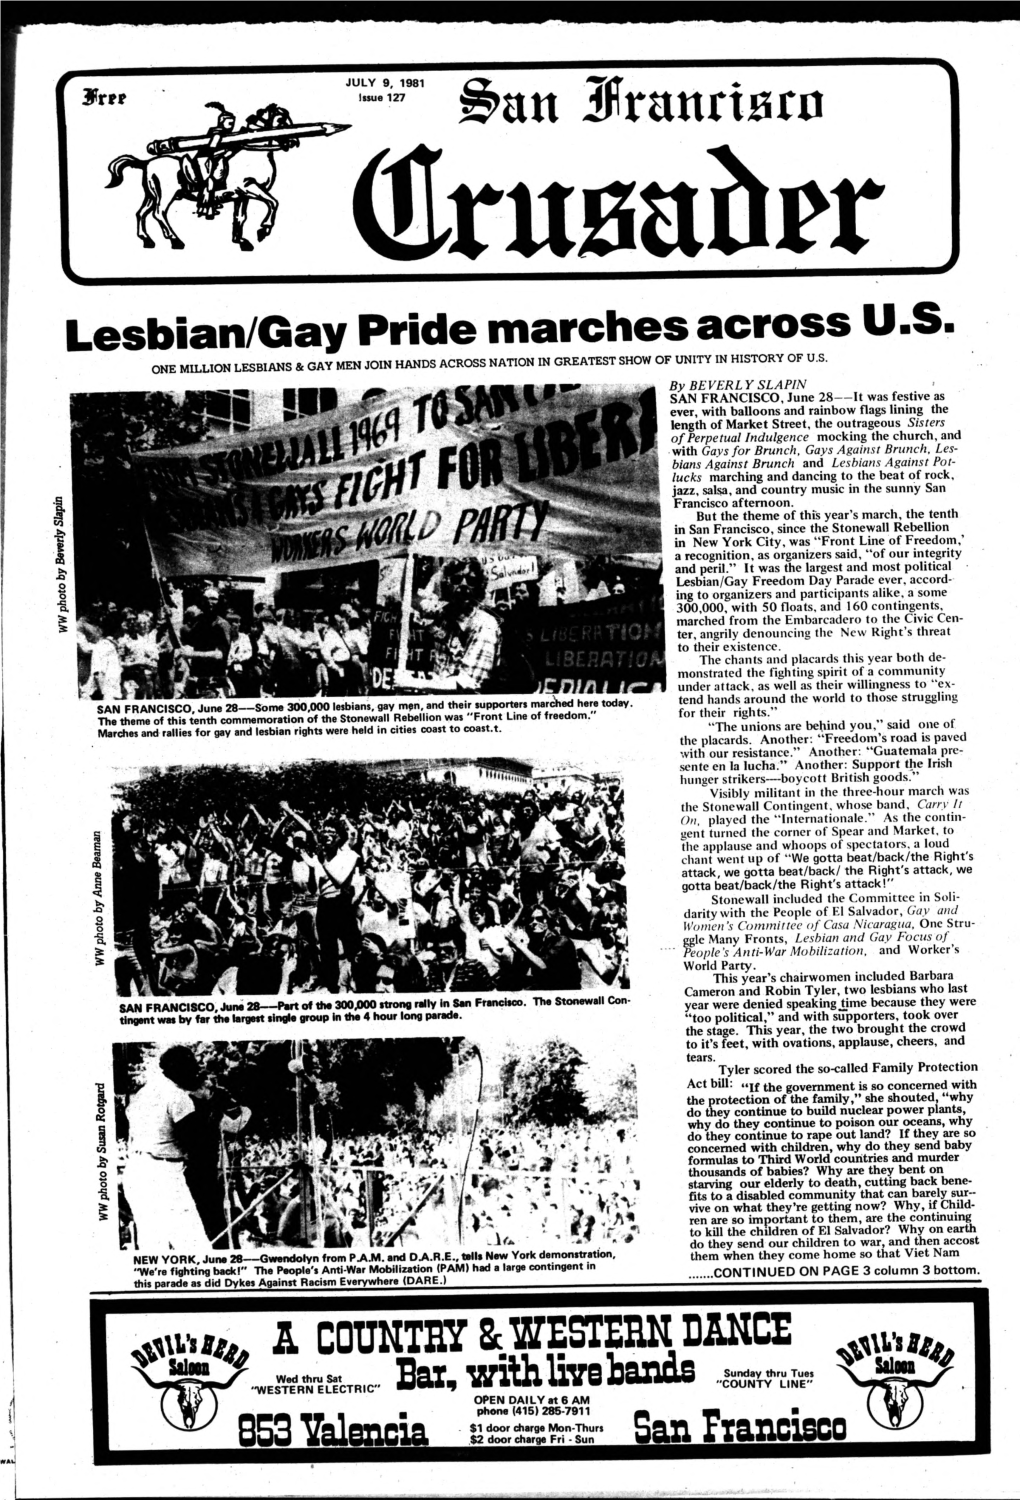 Lesbian/Gay Pride Marches Across U-S. ONE ■■■■ ■ LESBIANS & GAY MEN JOIN HANDS ACROSS NATION in GREATEST SHOW of UNITY in HISTORY of U S